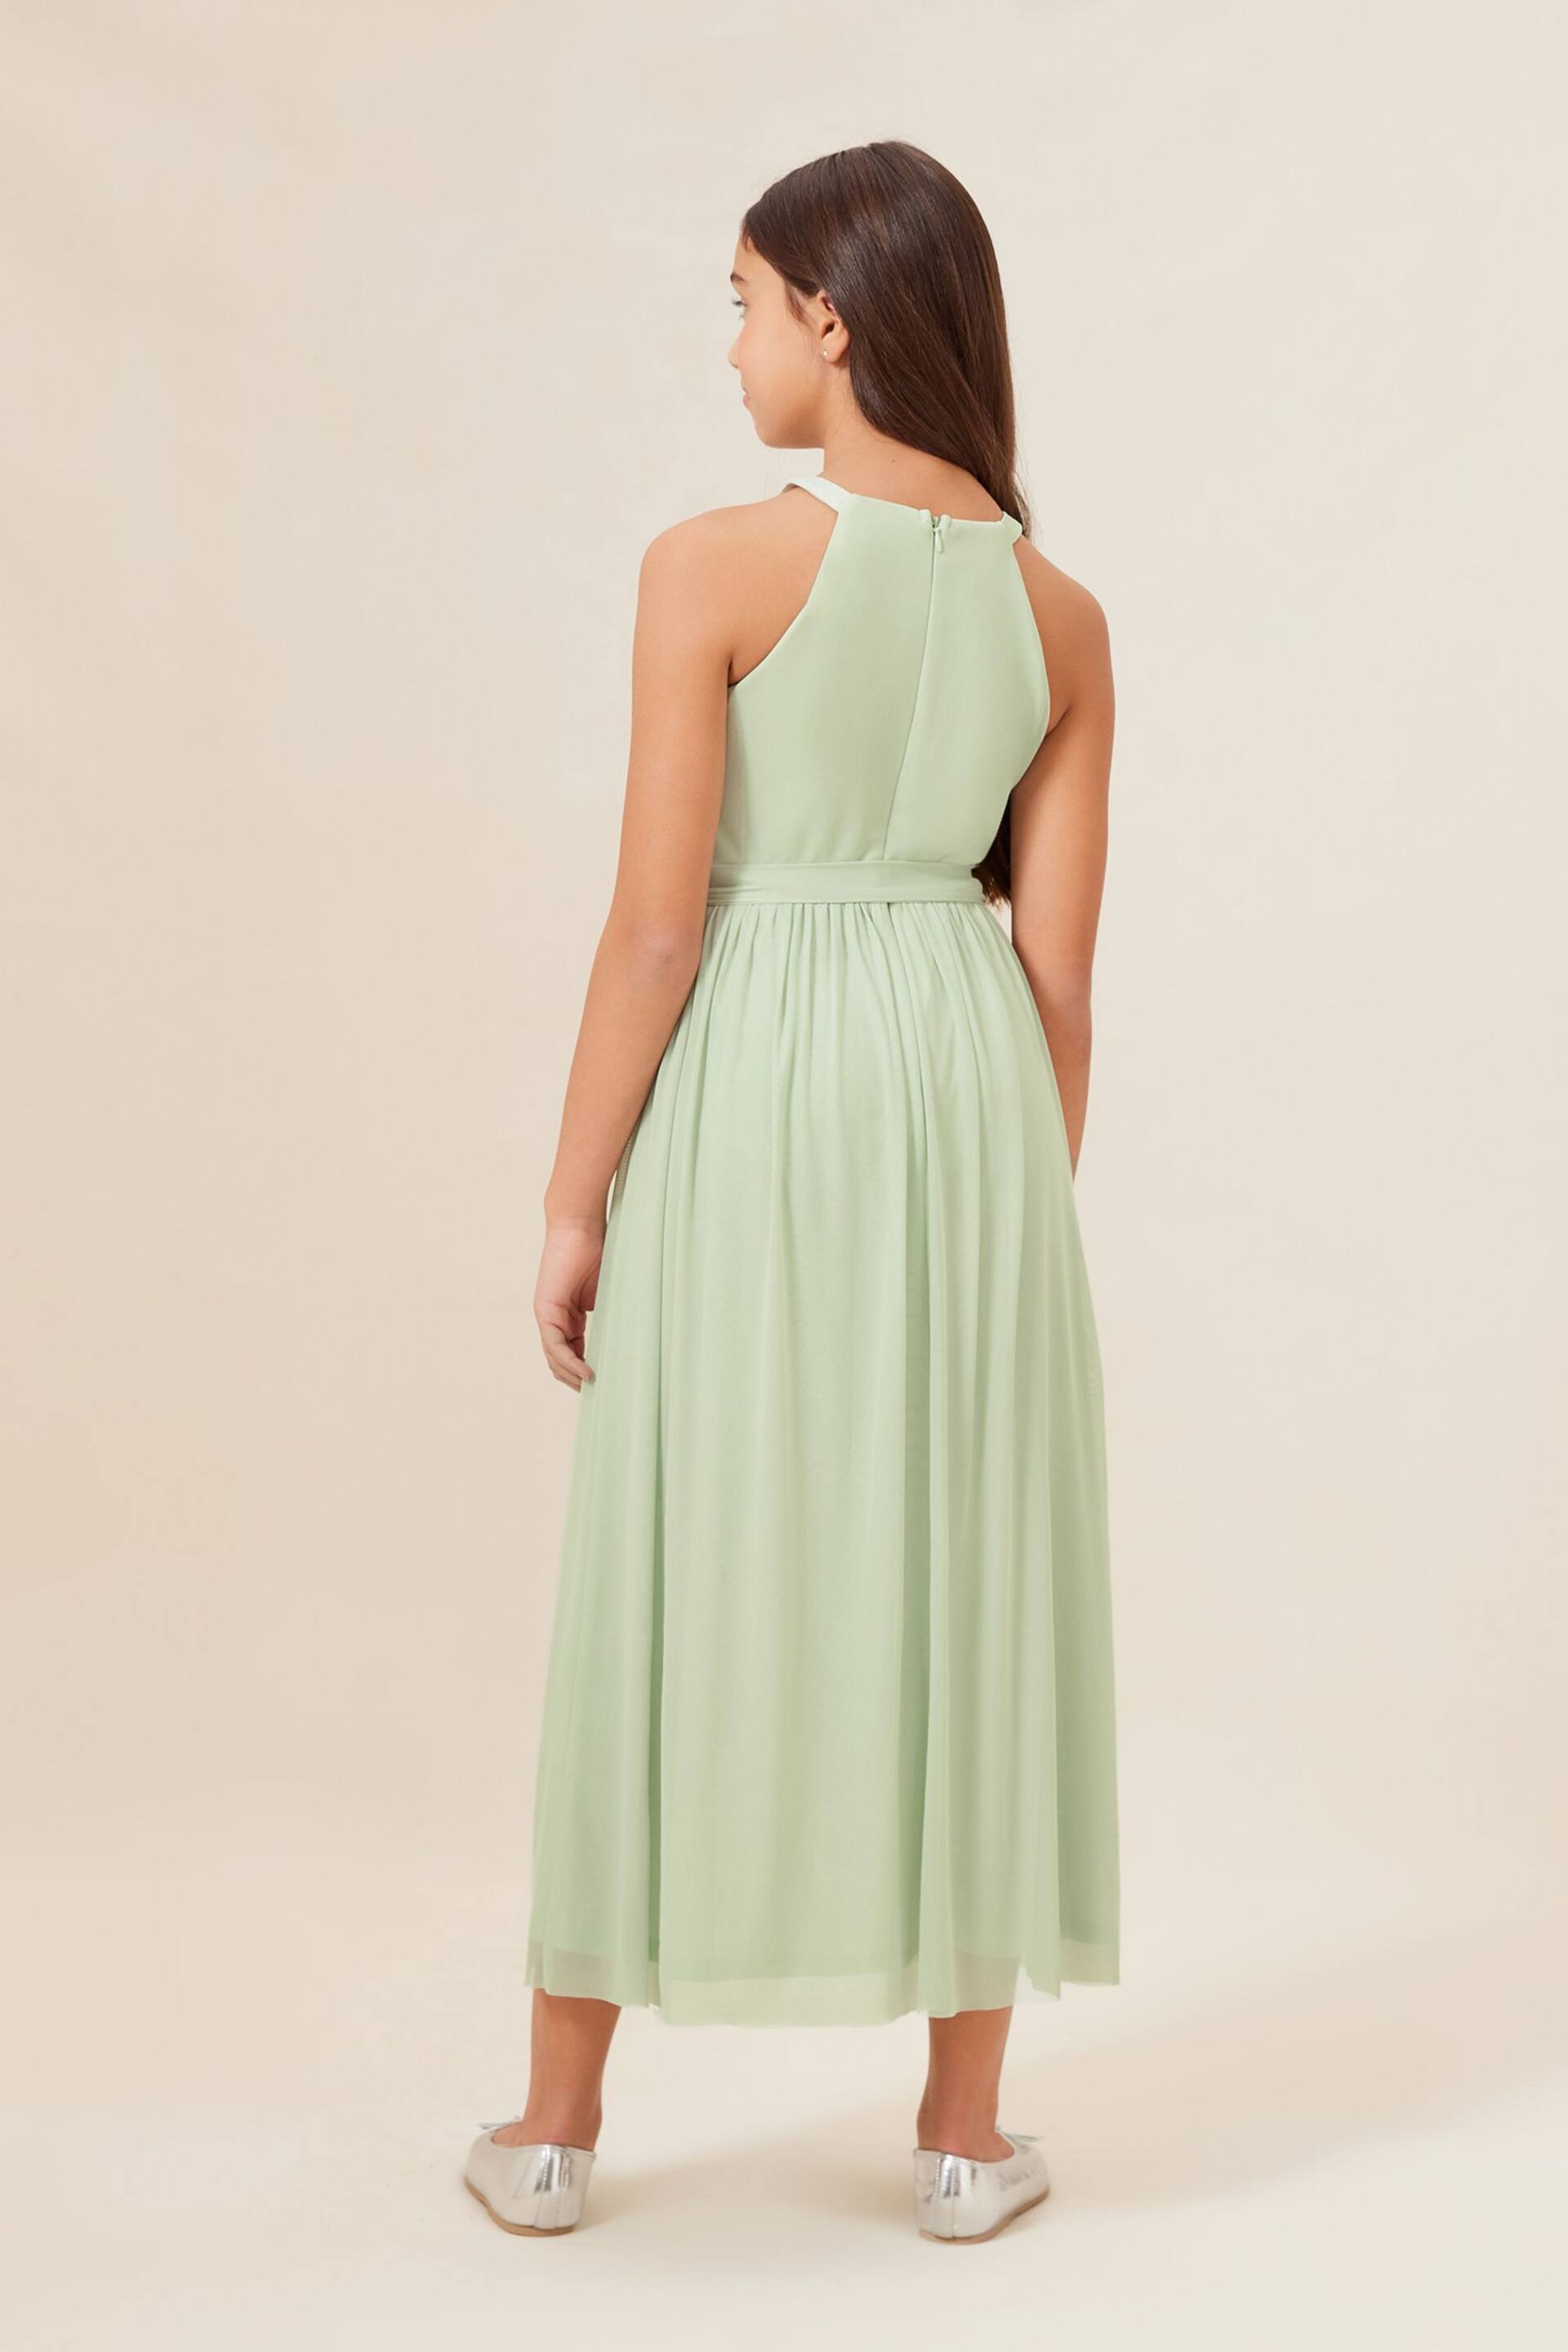 Lipsy Sage Green Cut Out Midi Occasion Dress -Teen - Image 3 of 4